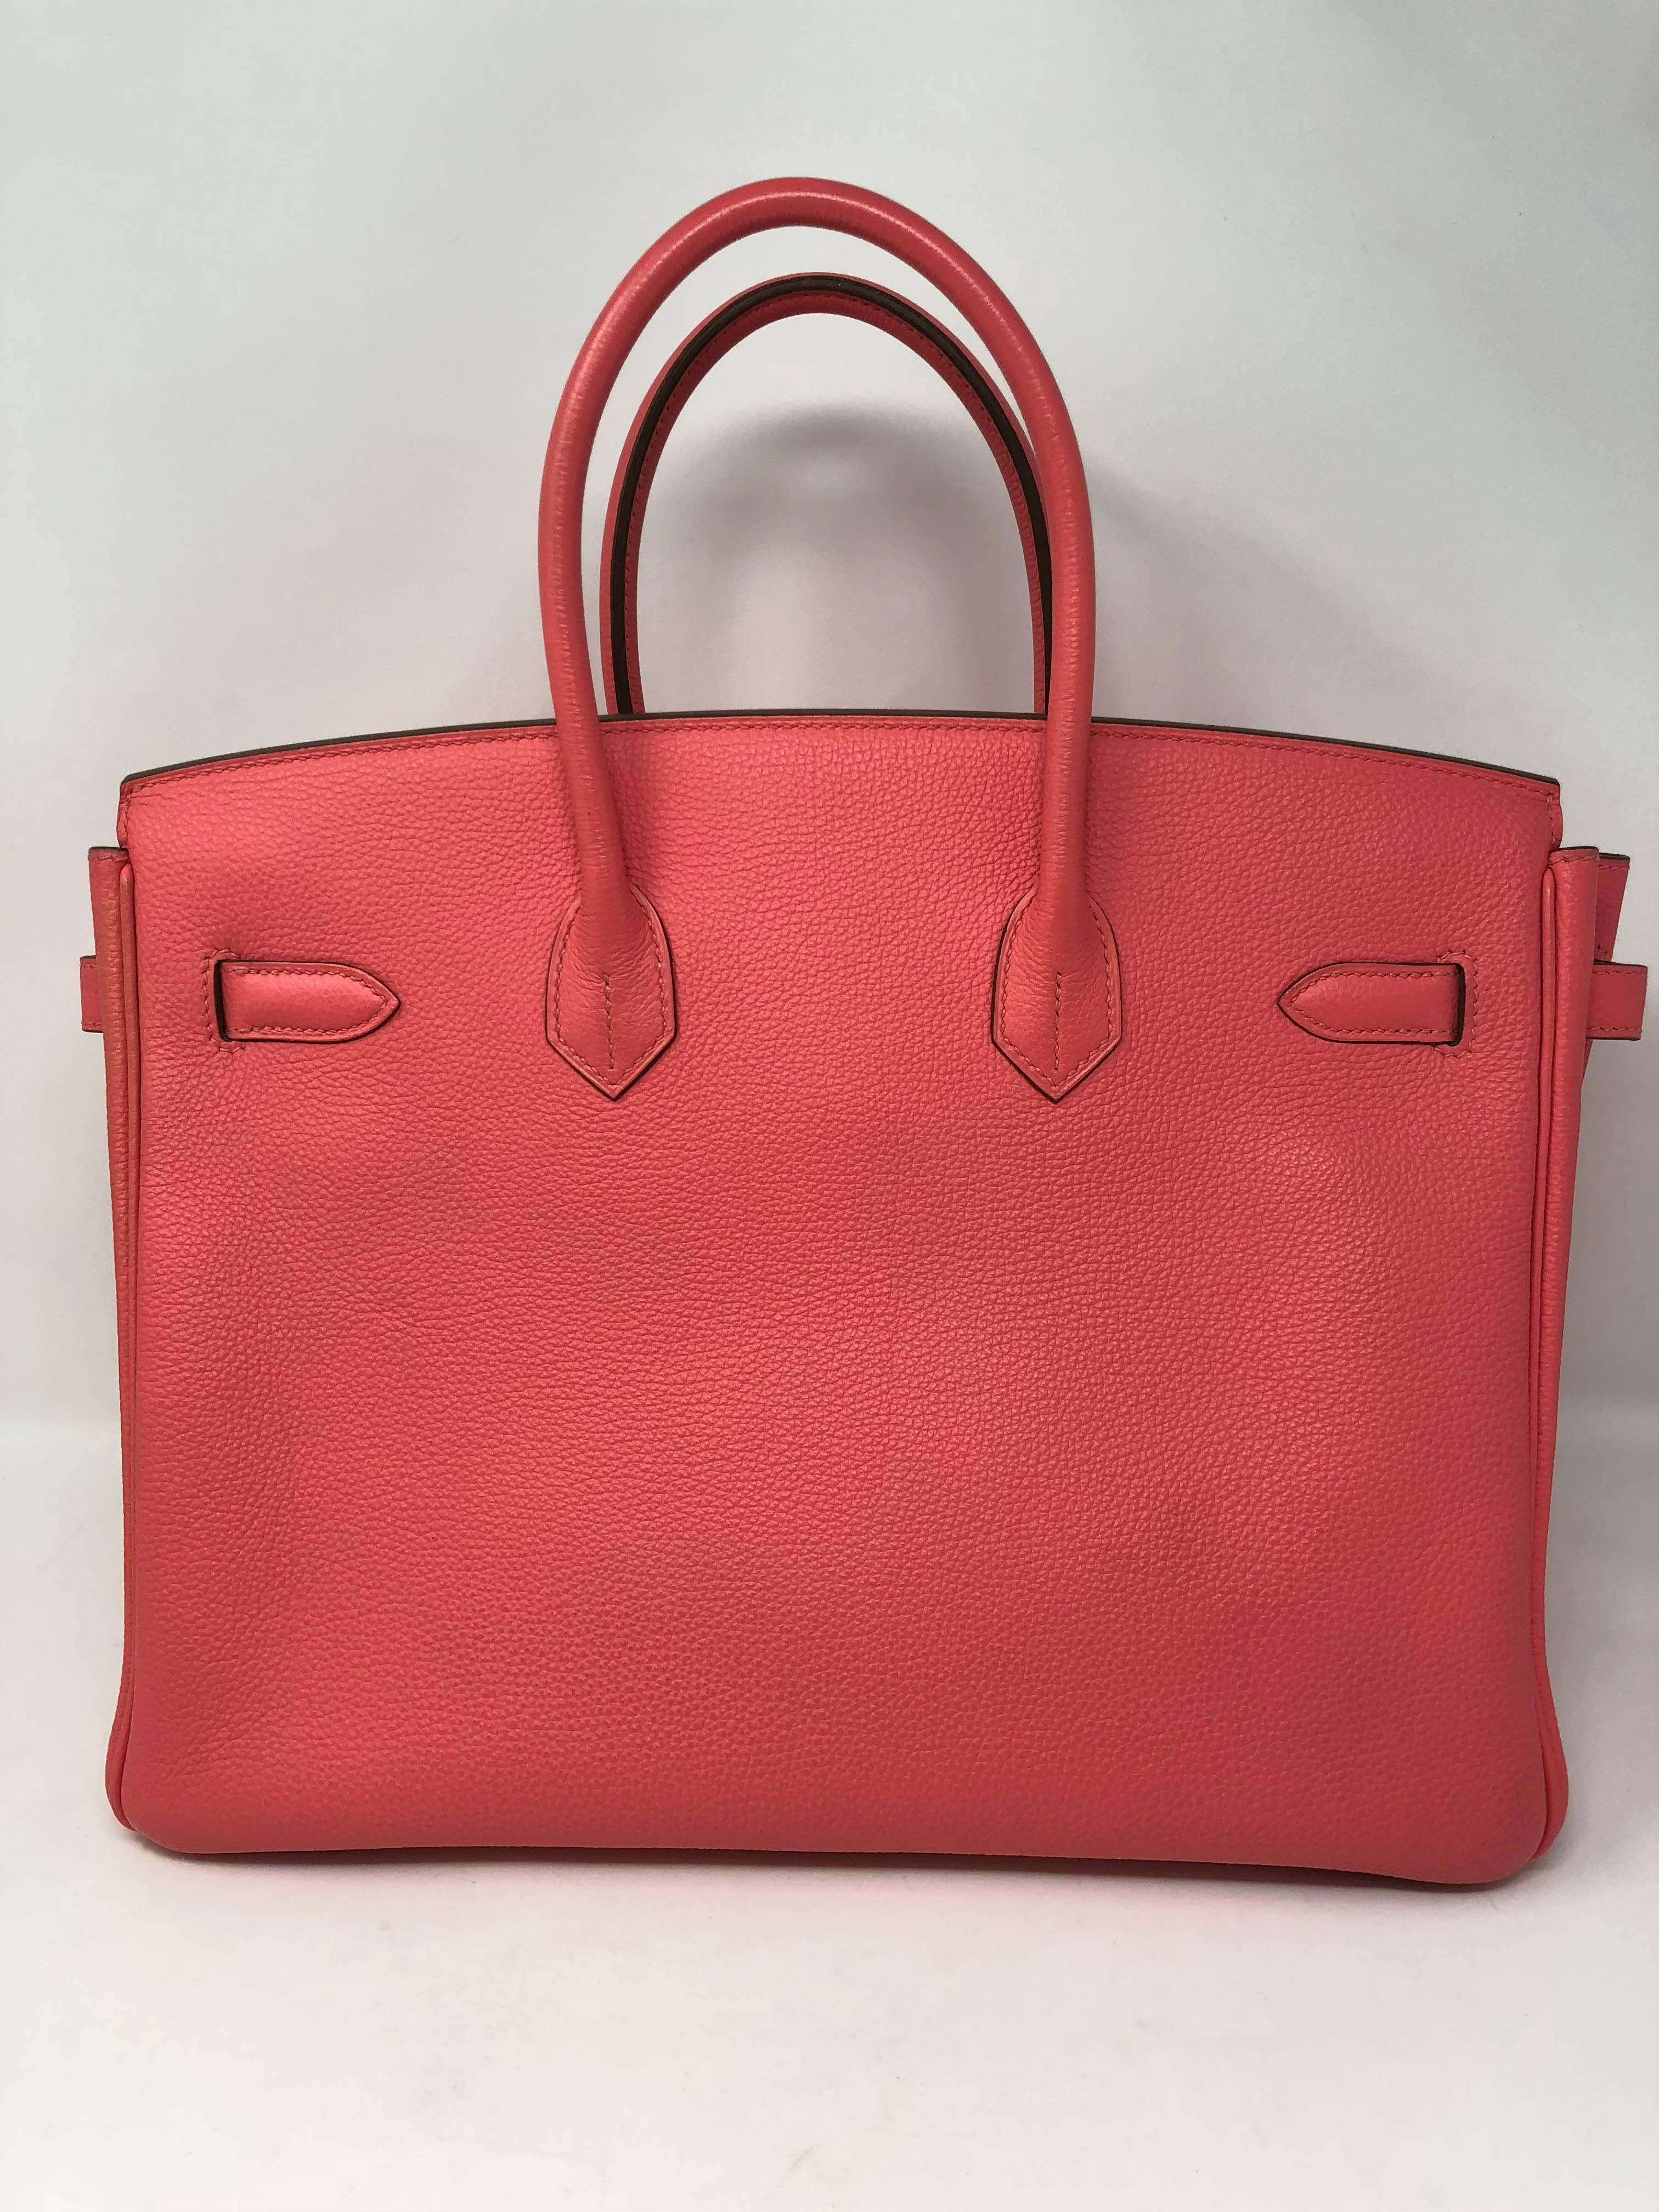 Hermes Birkin 35 in Bubble gum pink color with silver hardware. Bag is like new condition from 2012 and has a little storage smell. 